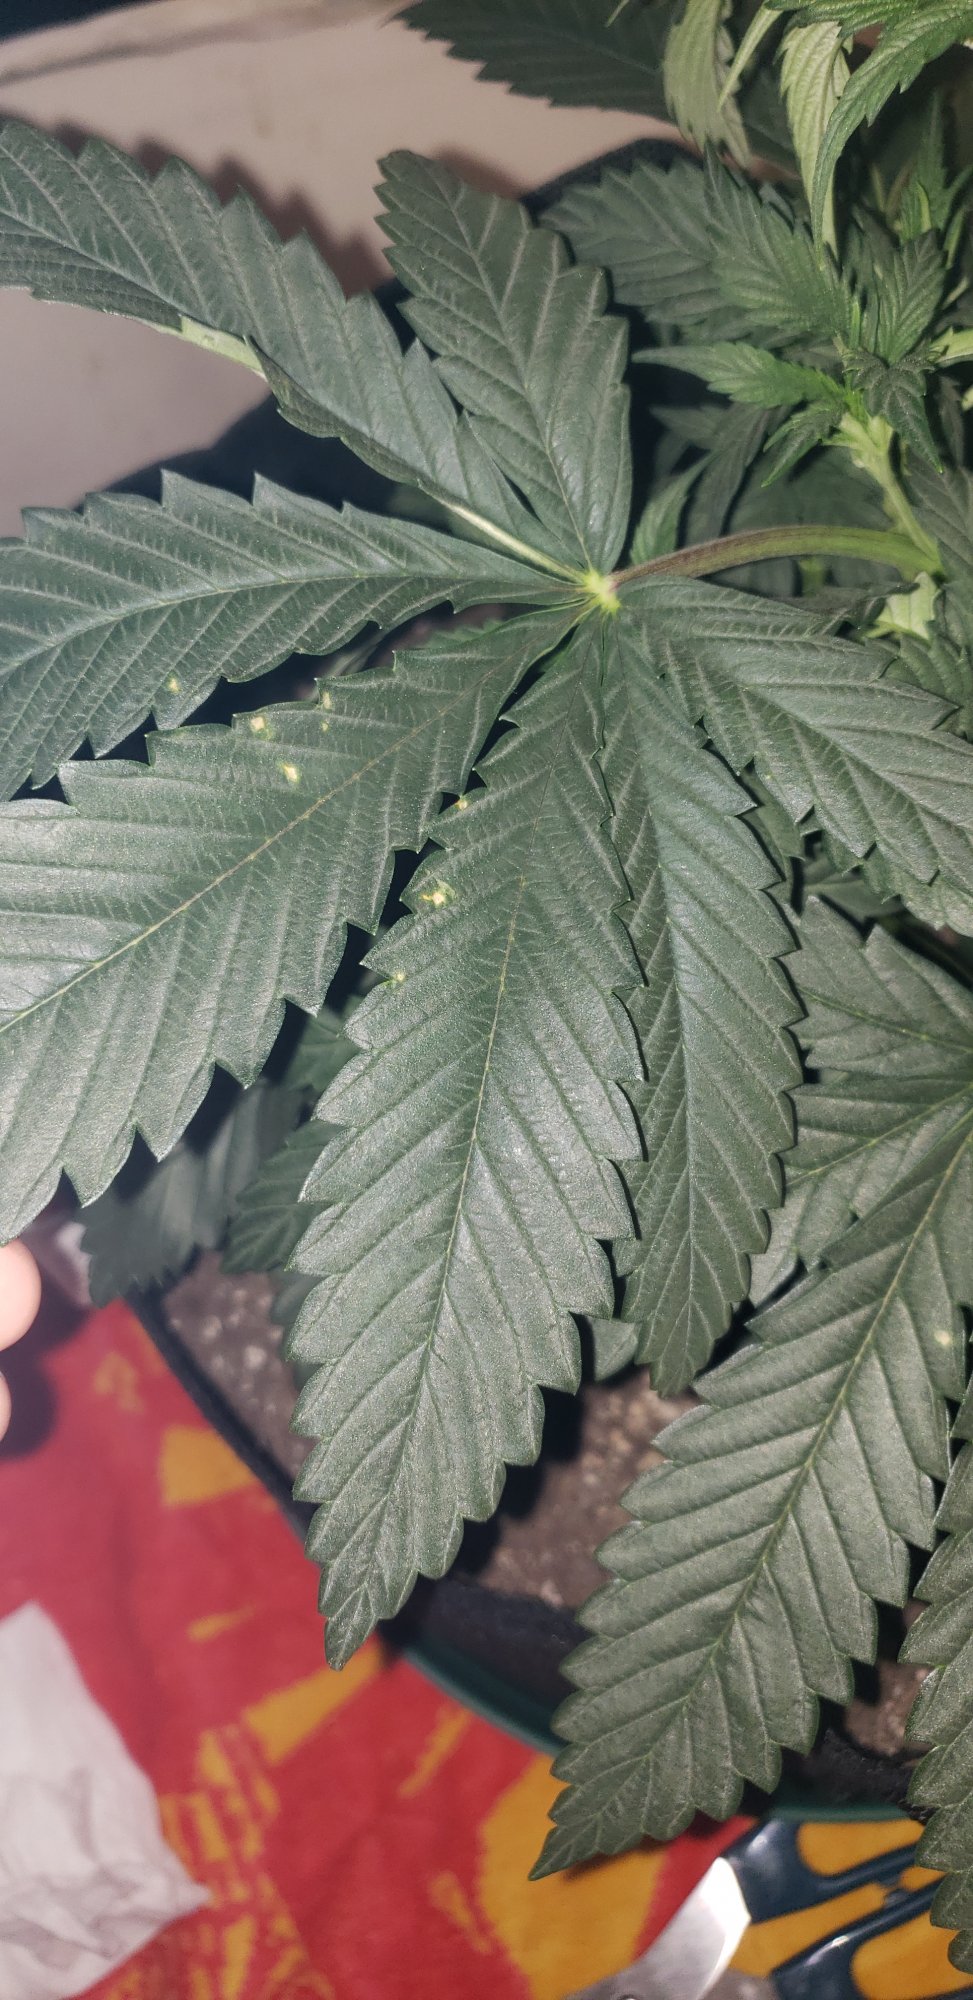 Pest or deficiency spot on leaves 2